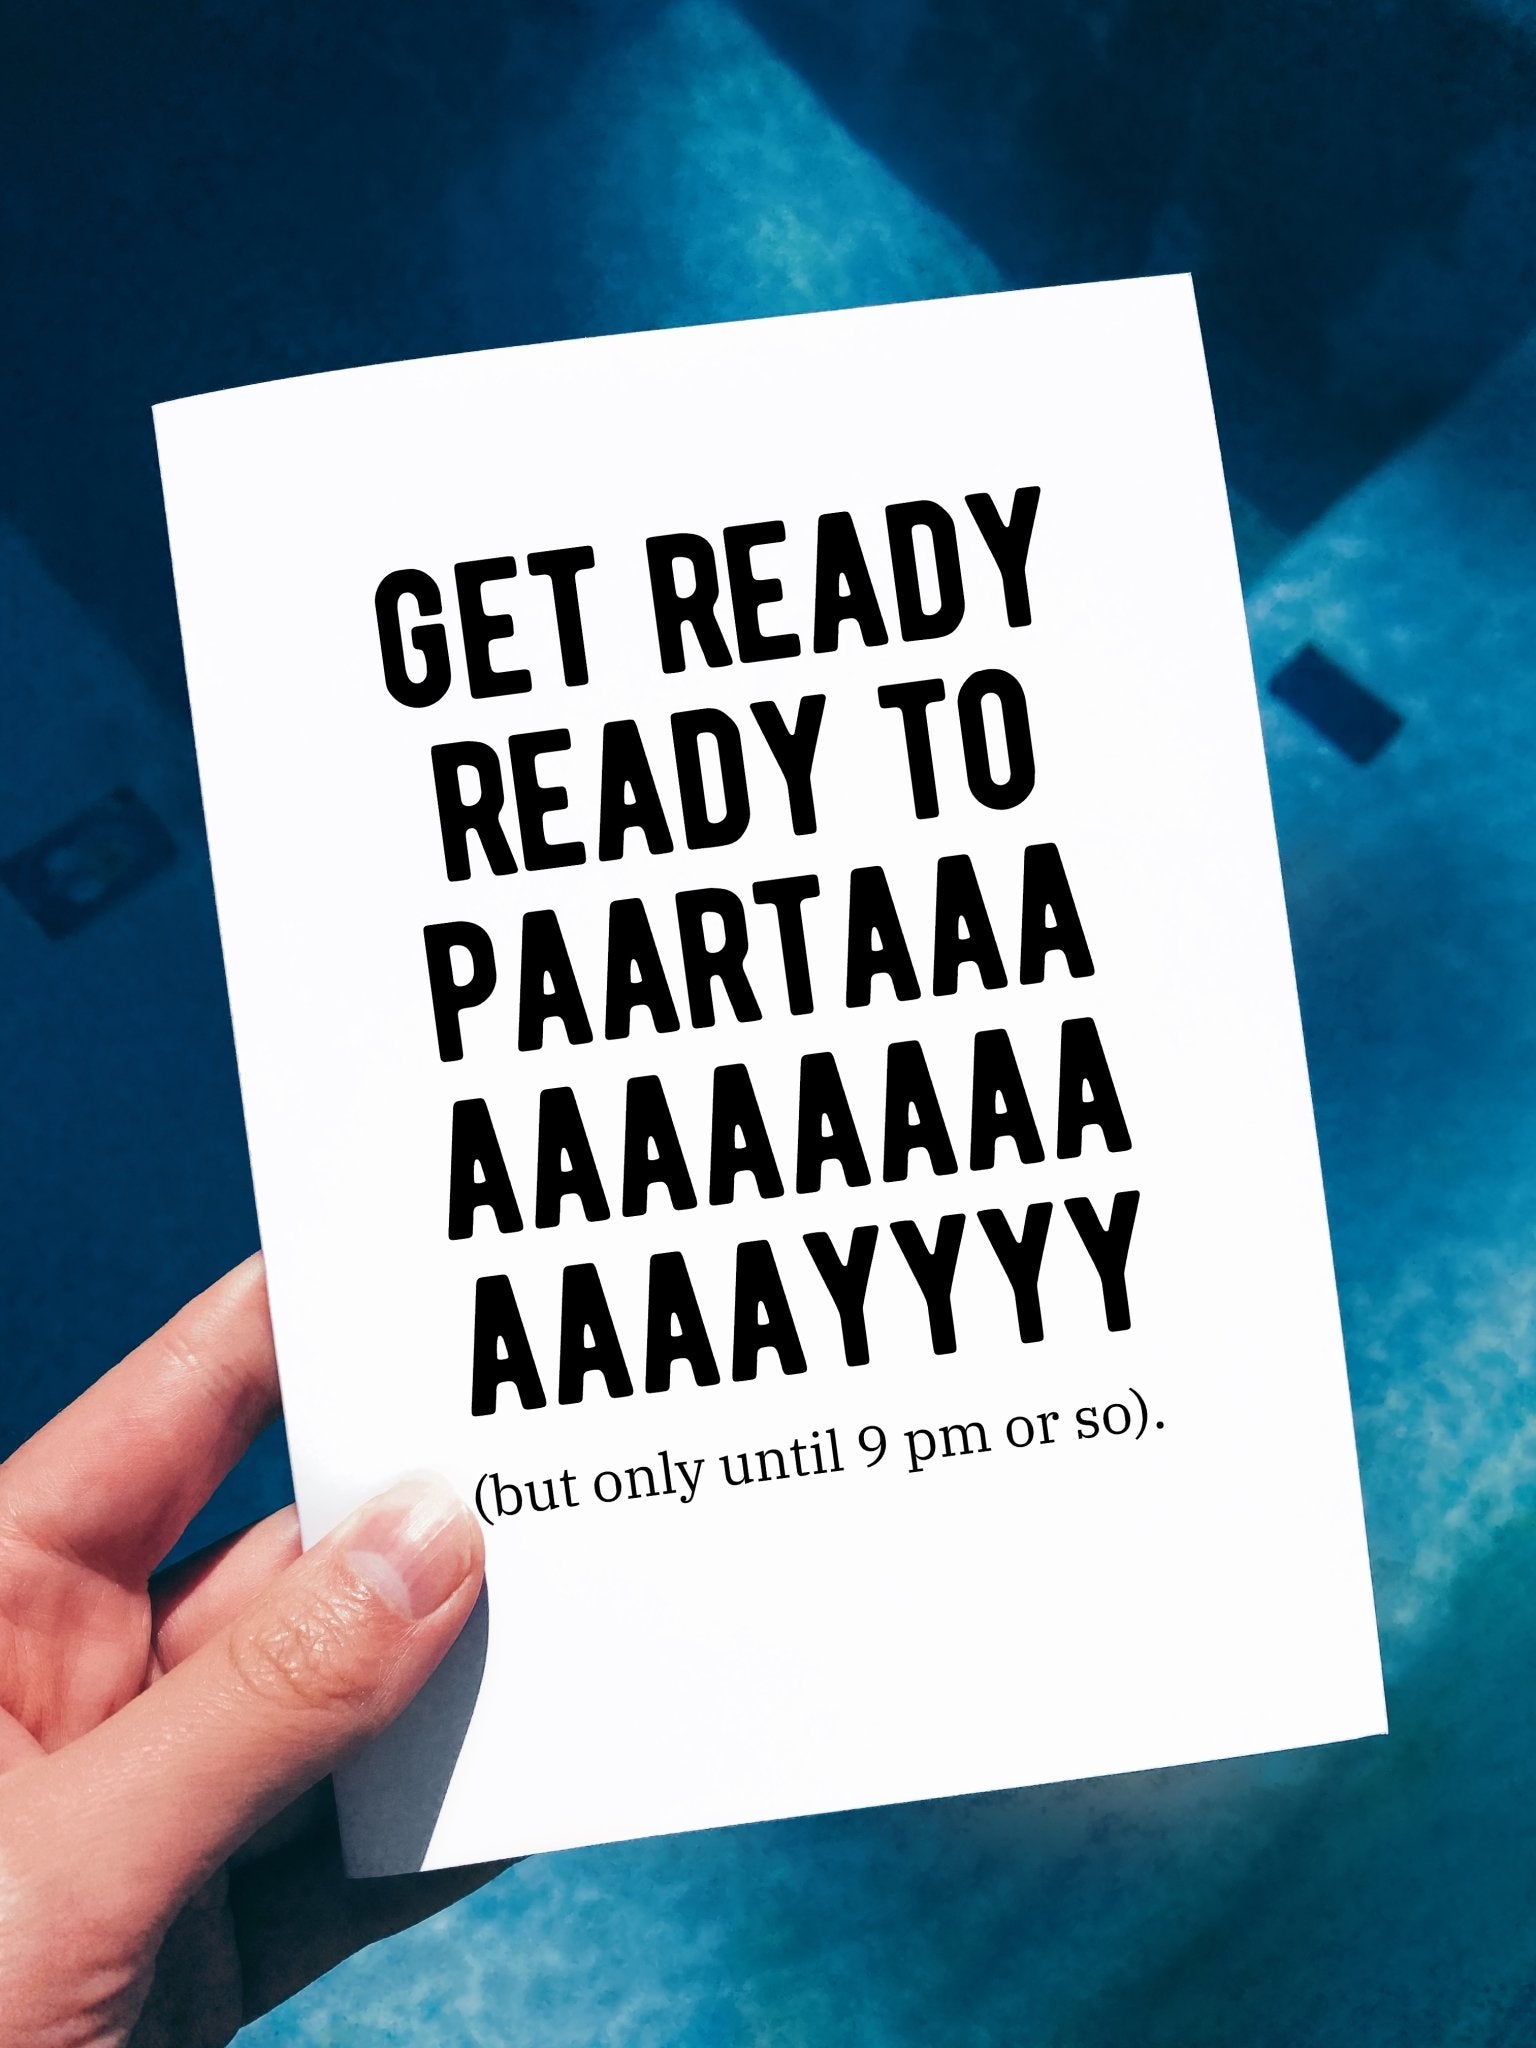 Get Ready To Party But Only Until 9pm Or So Greeting Card - UntamedEgo LLC.